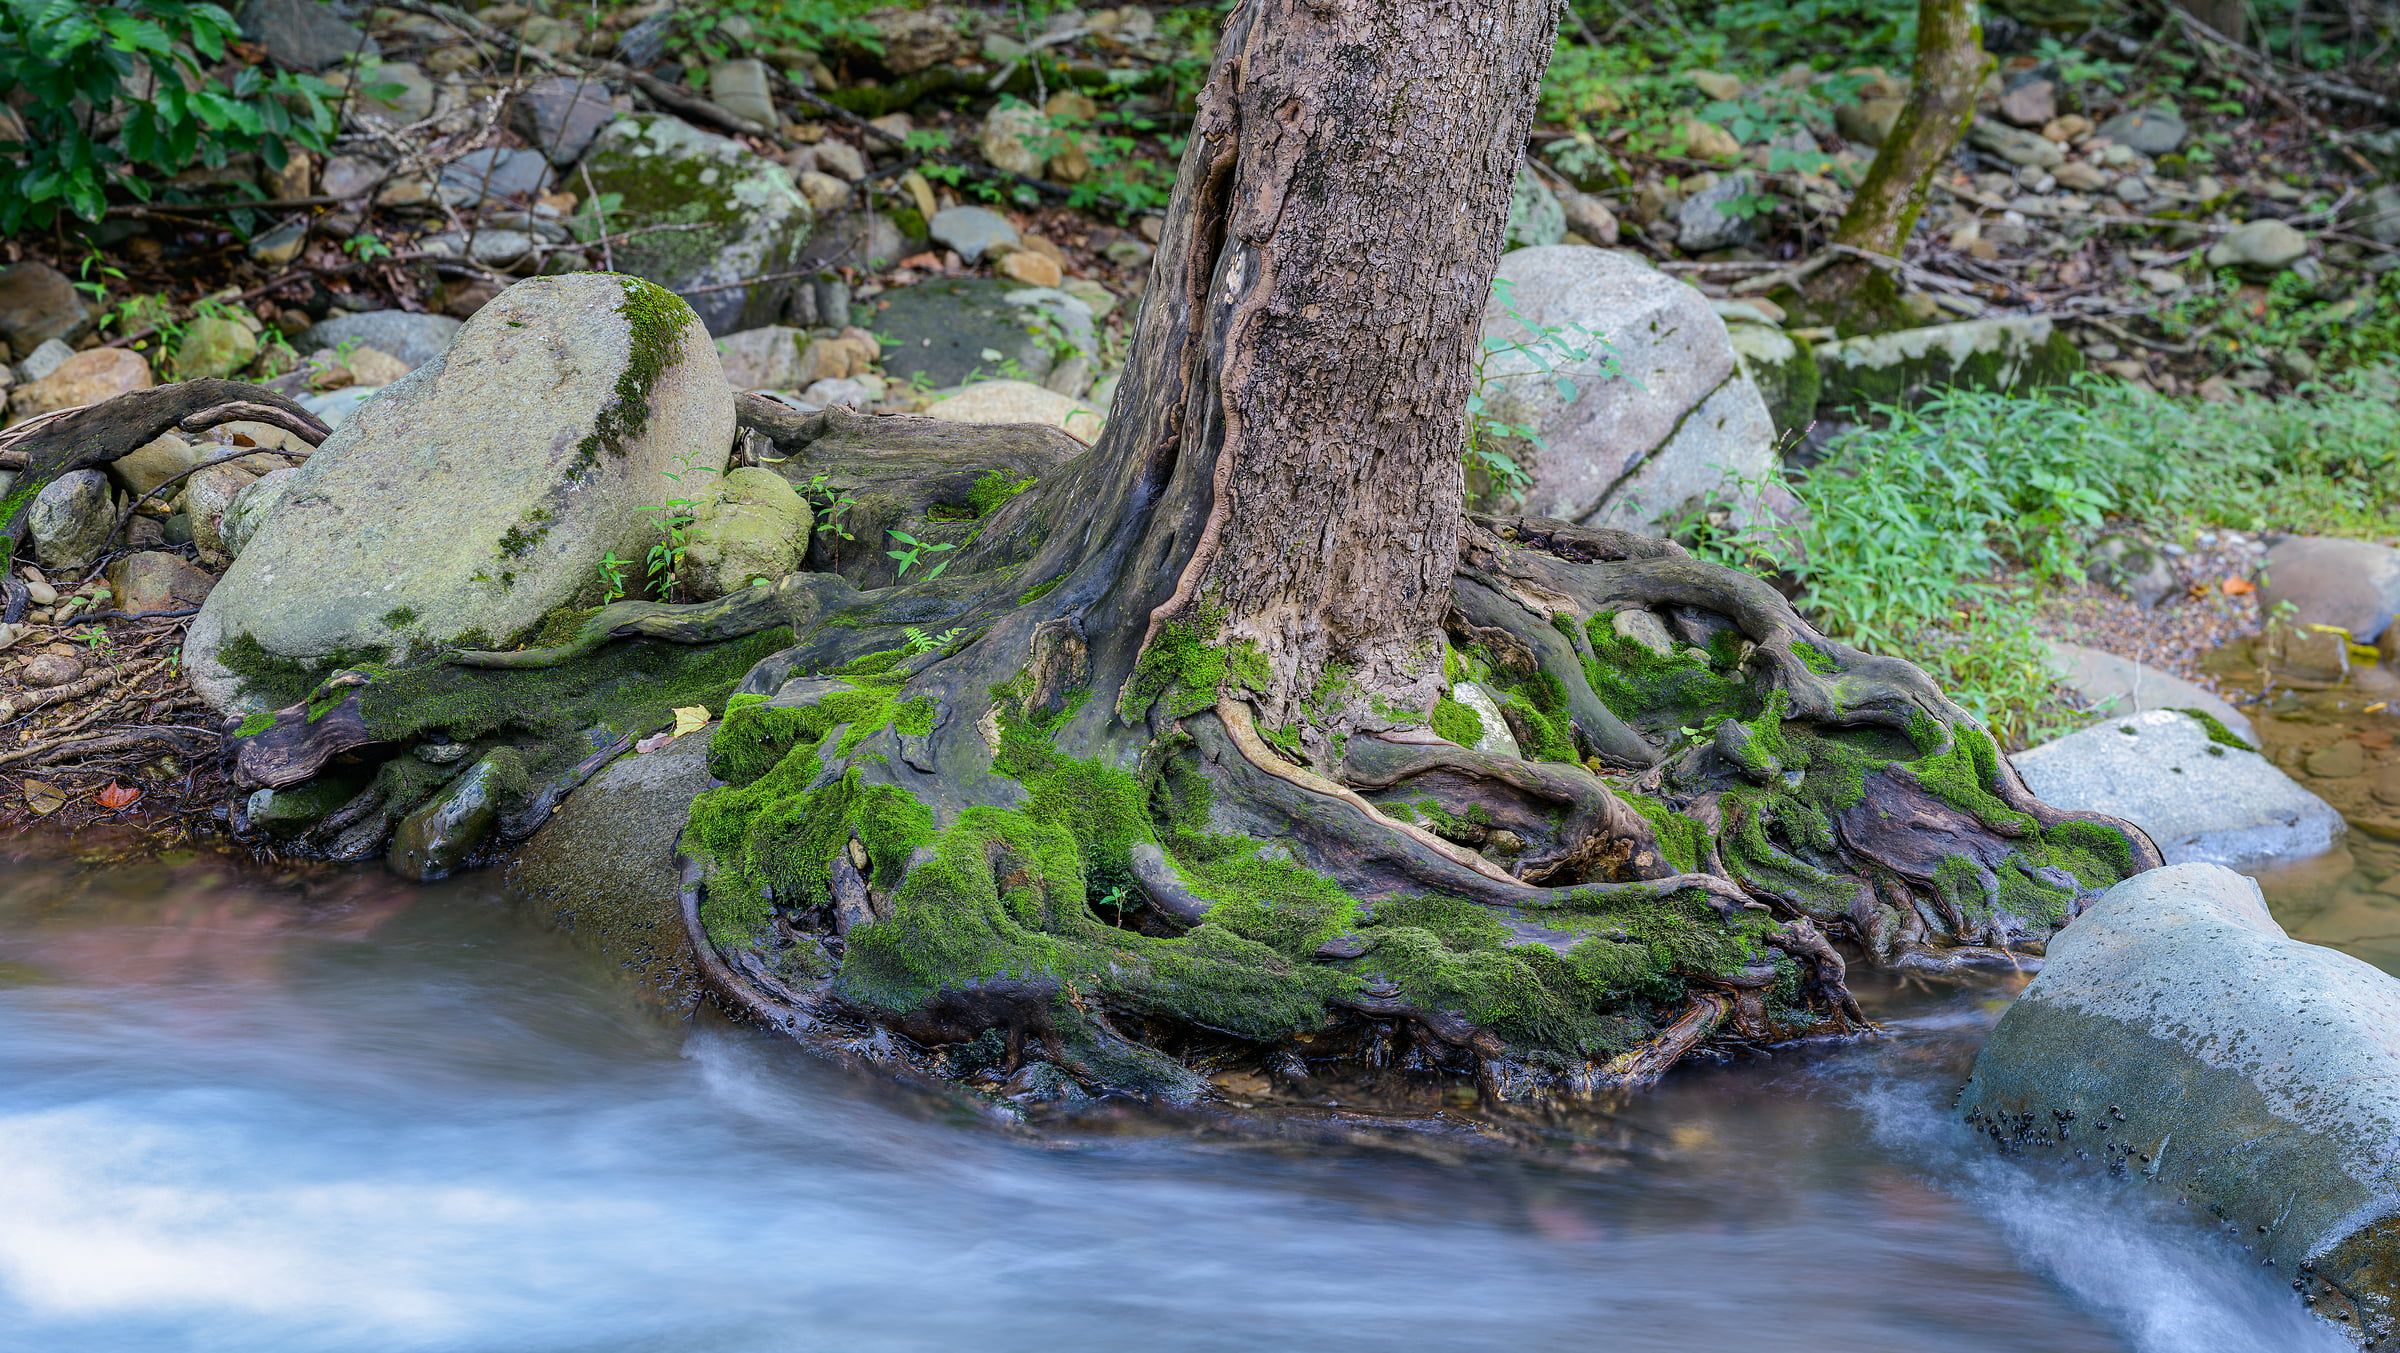 551 megapixels! A very high resolution, large-format VAST photo print of a tree trunk along the banks of a stream; nature photograph created by Tim Lo Monaco in Swift Run, Standardsville, Shenandoah, Virginia